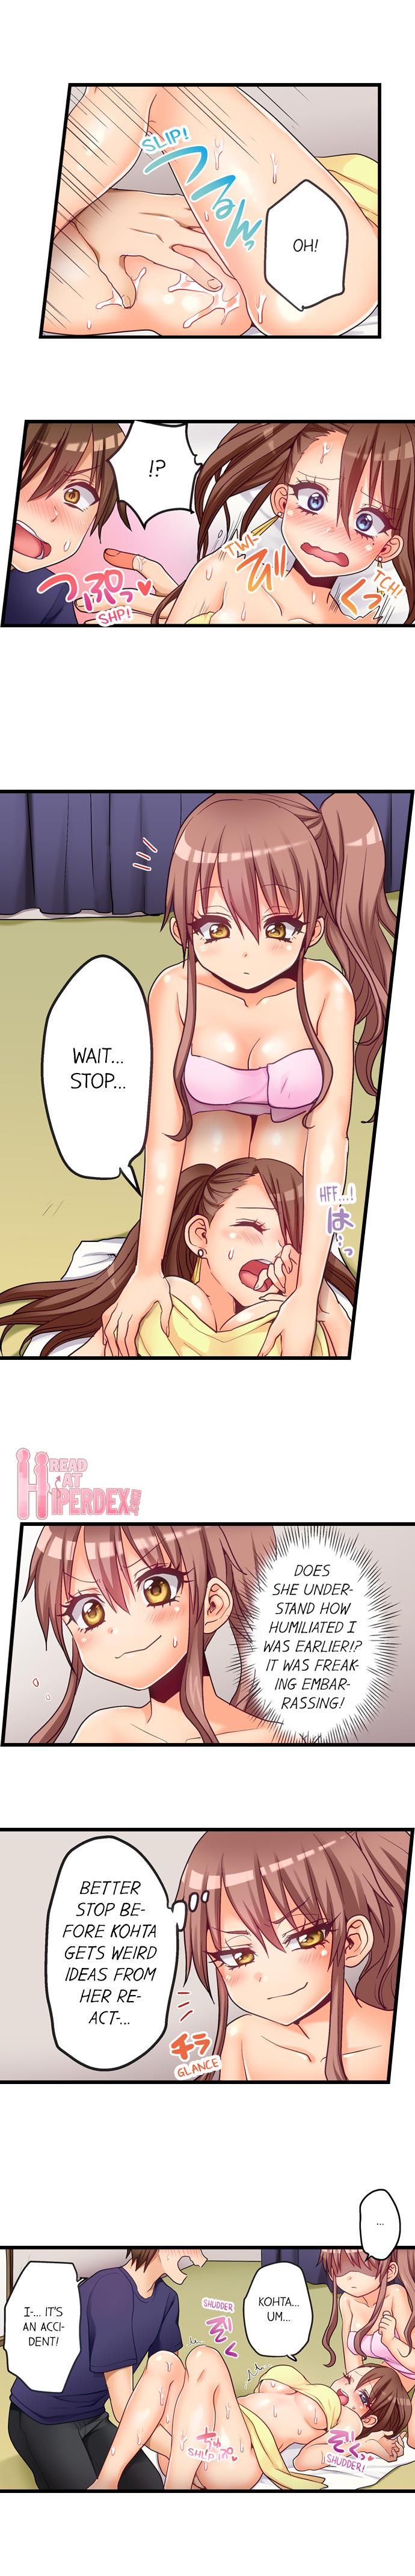 Teen Fuck Porori] My First Time is with.... My Little Sister?! - Original Cheat - Page 9